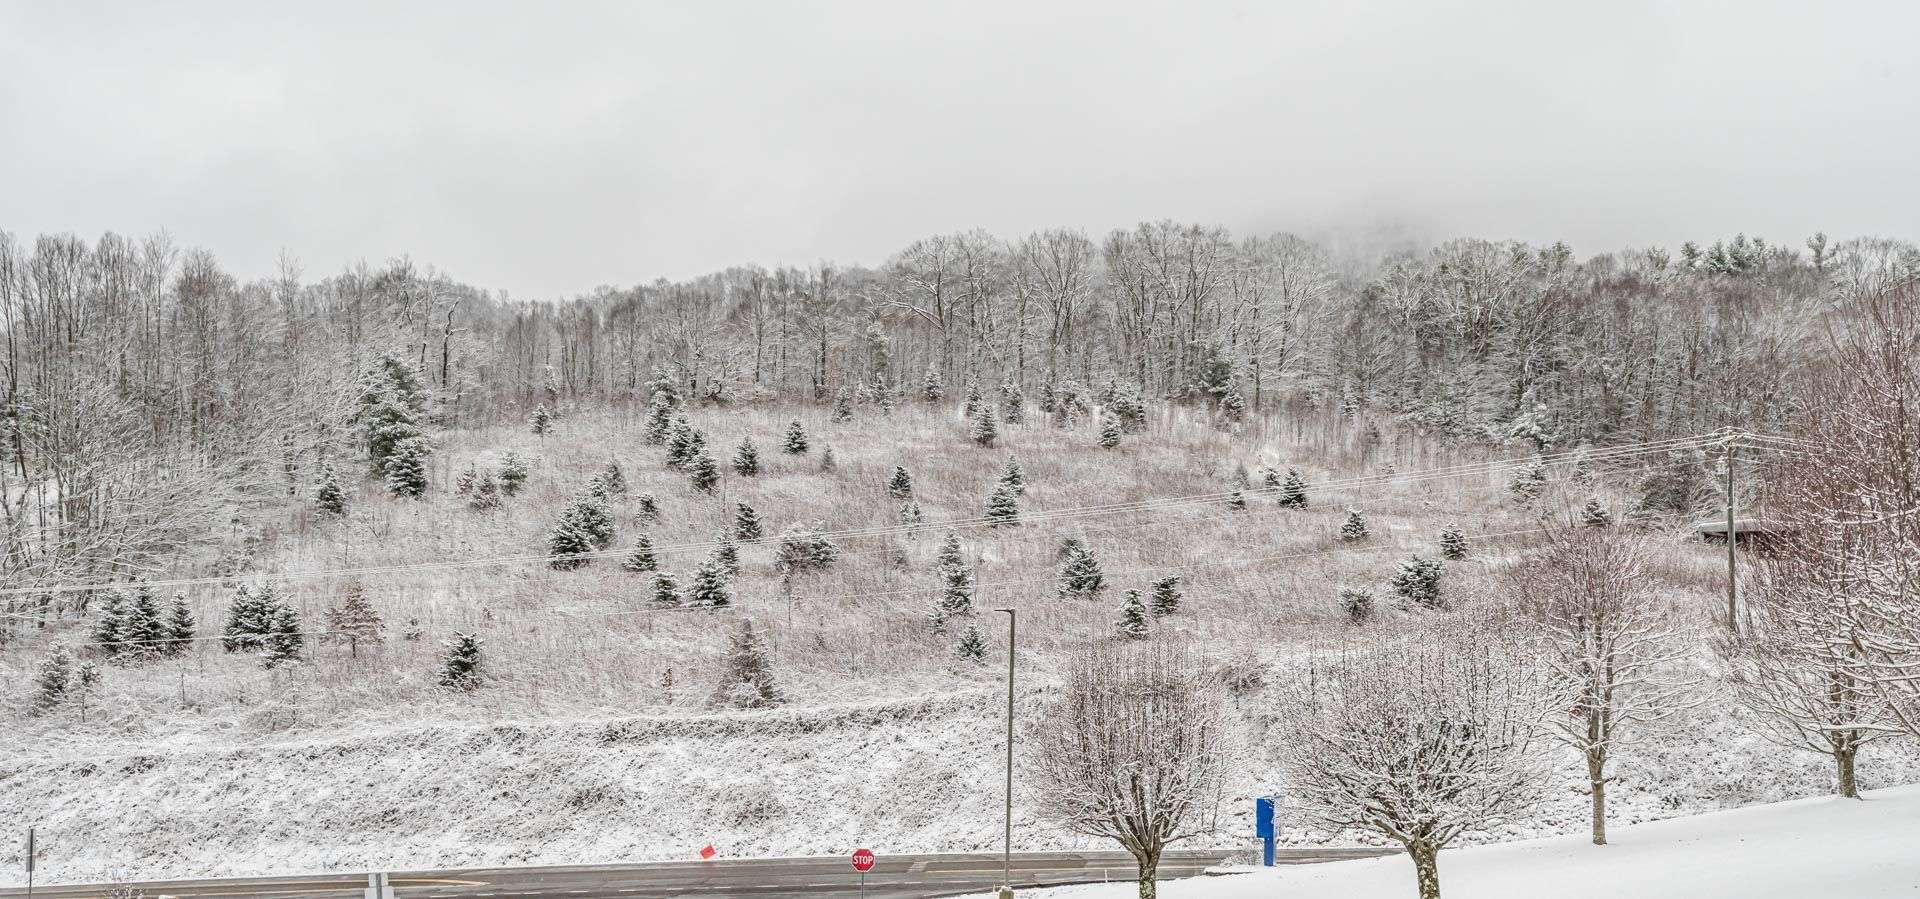 A beautiful winter wonderland for your new NC Mountain cabin or  full time home and located just across the road from Blue Ridge Elementary School.  This is the view from the school.